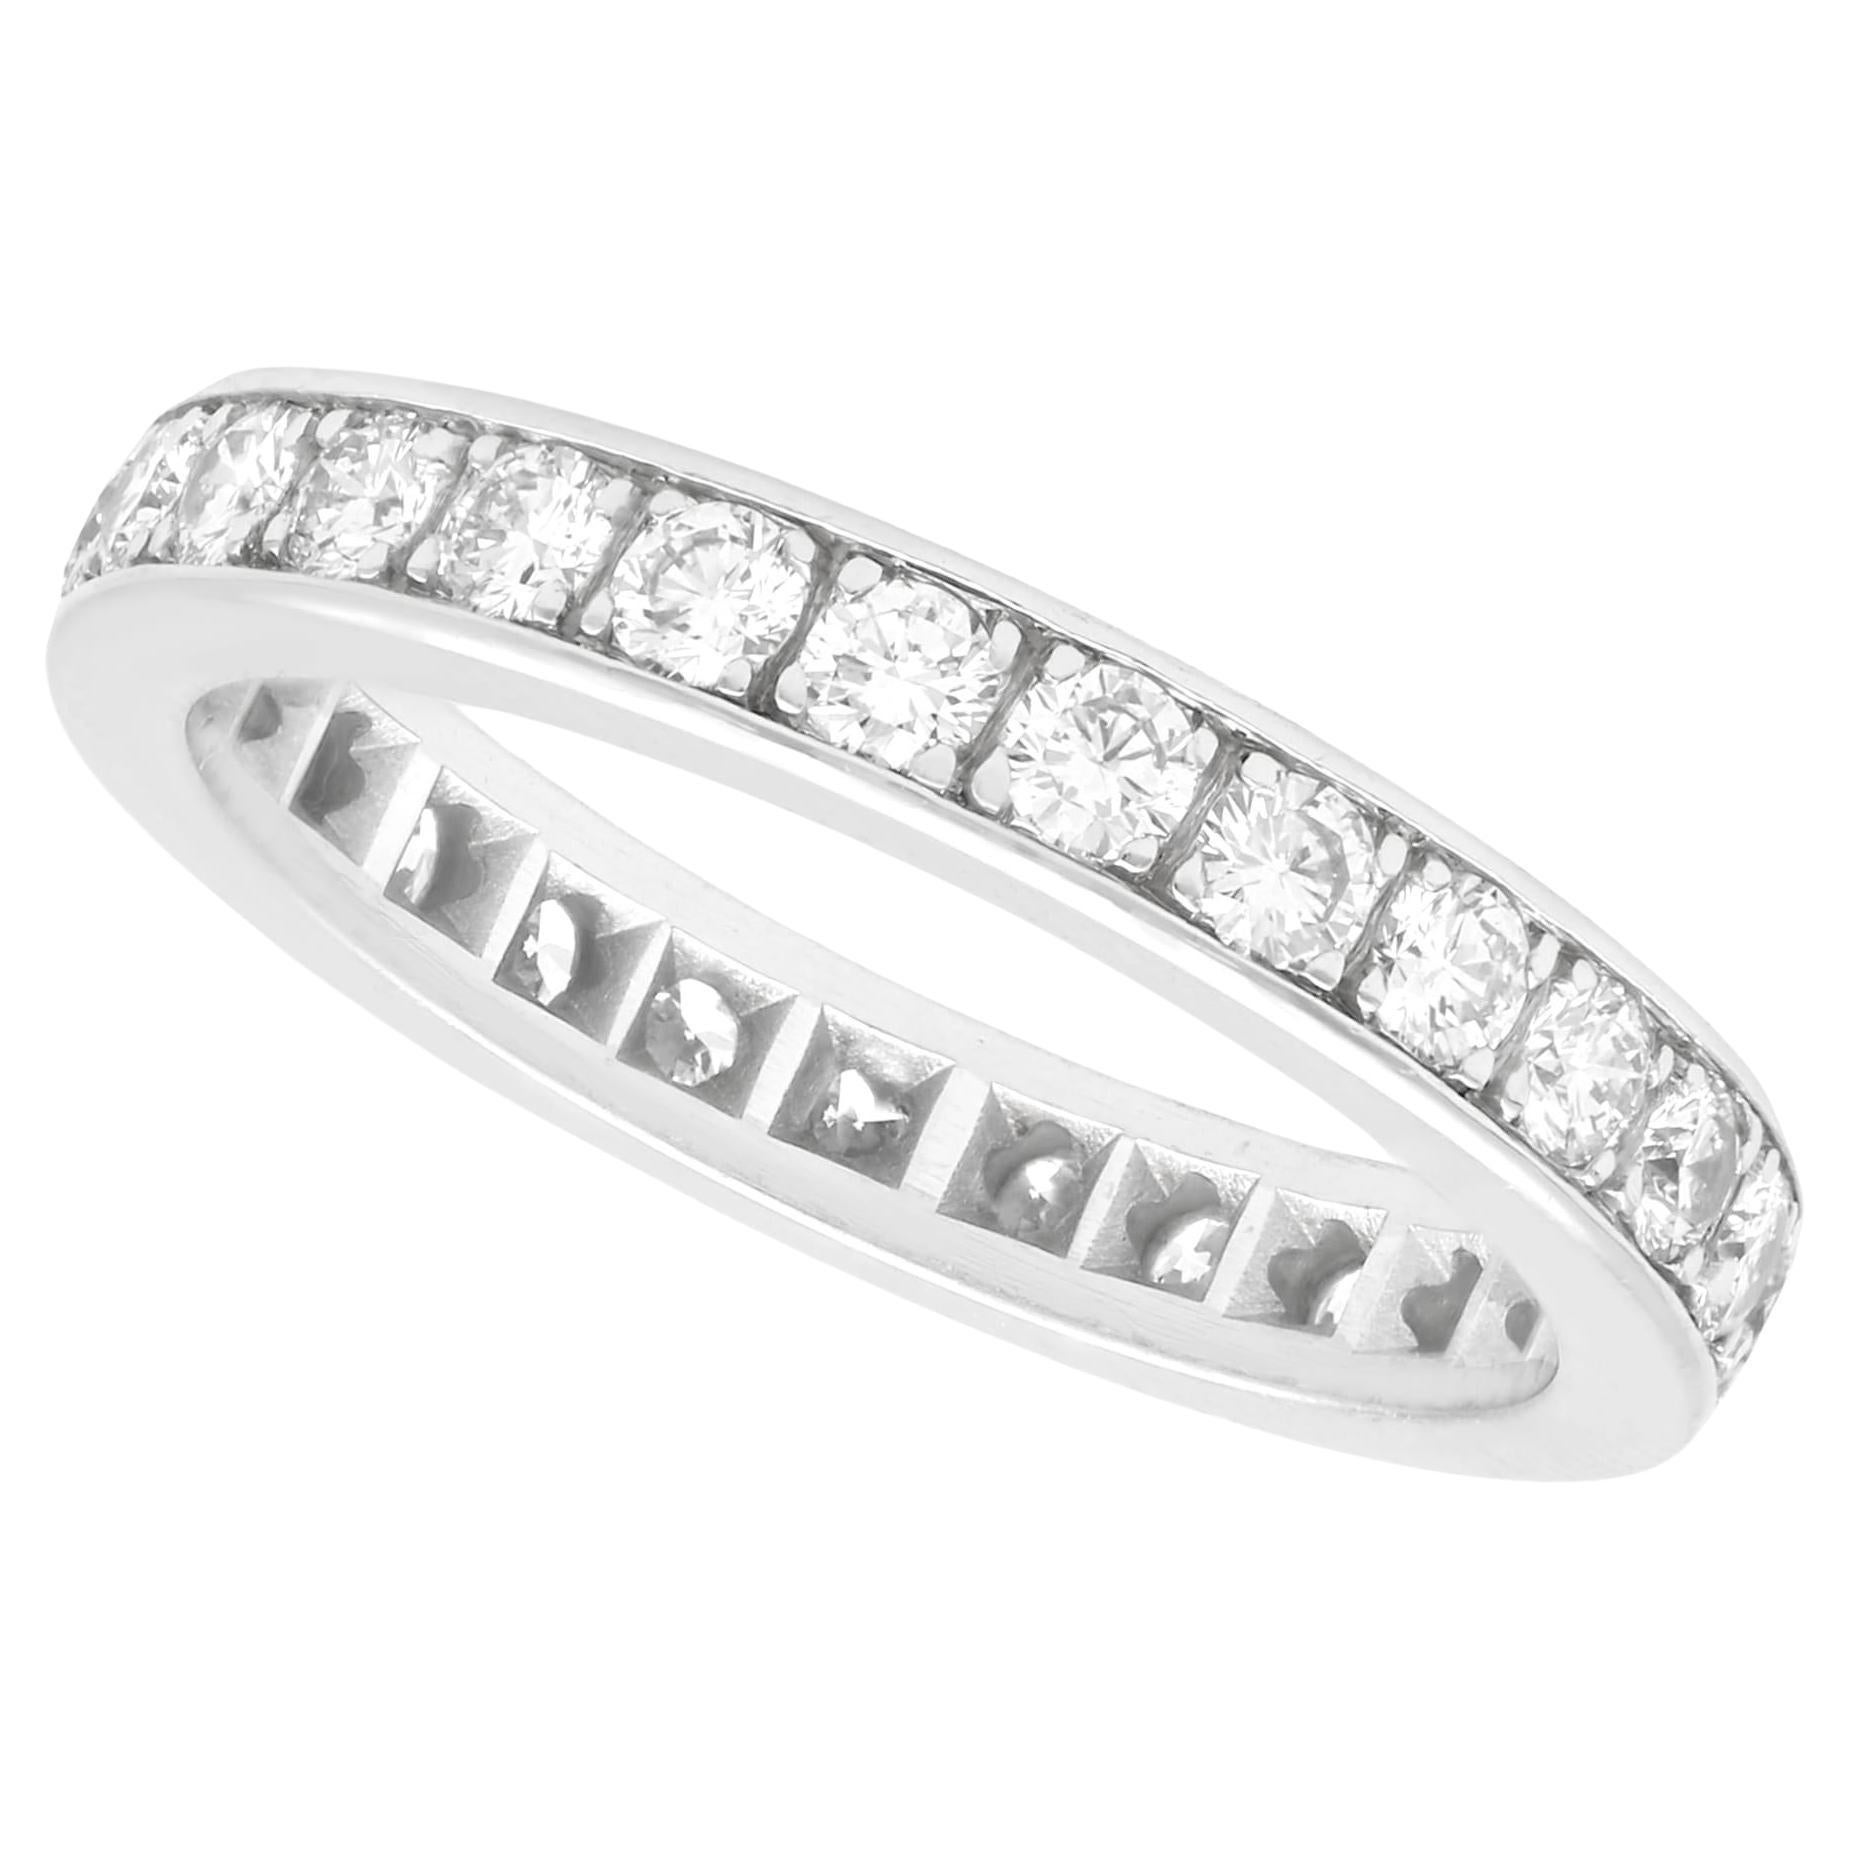 1970s Vintage 1.25 Carat Diamond and White Gold Full Eternity Ring For Sale